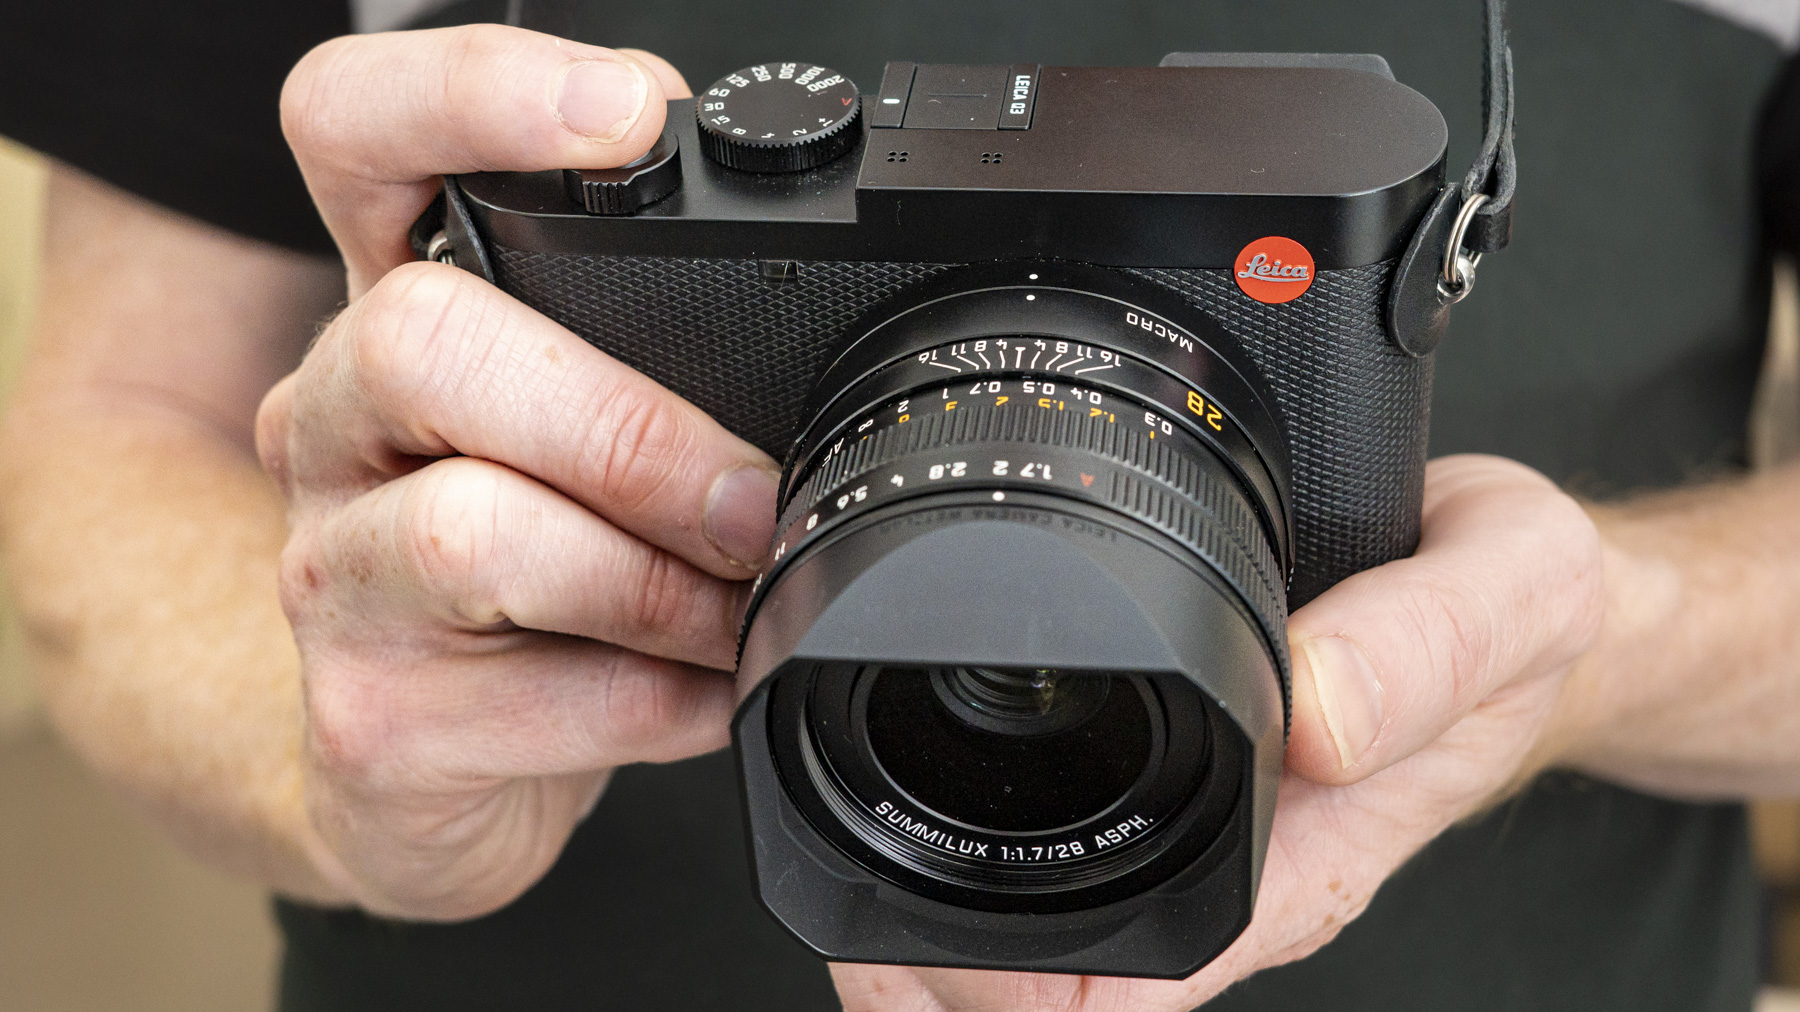 $9,790 Leica Q3 Makes Full-Frame Cameras Great (but Very Expensive